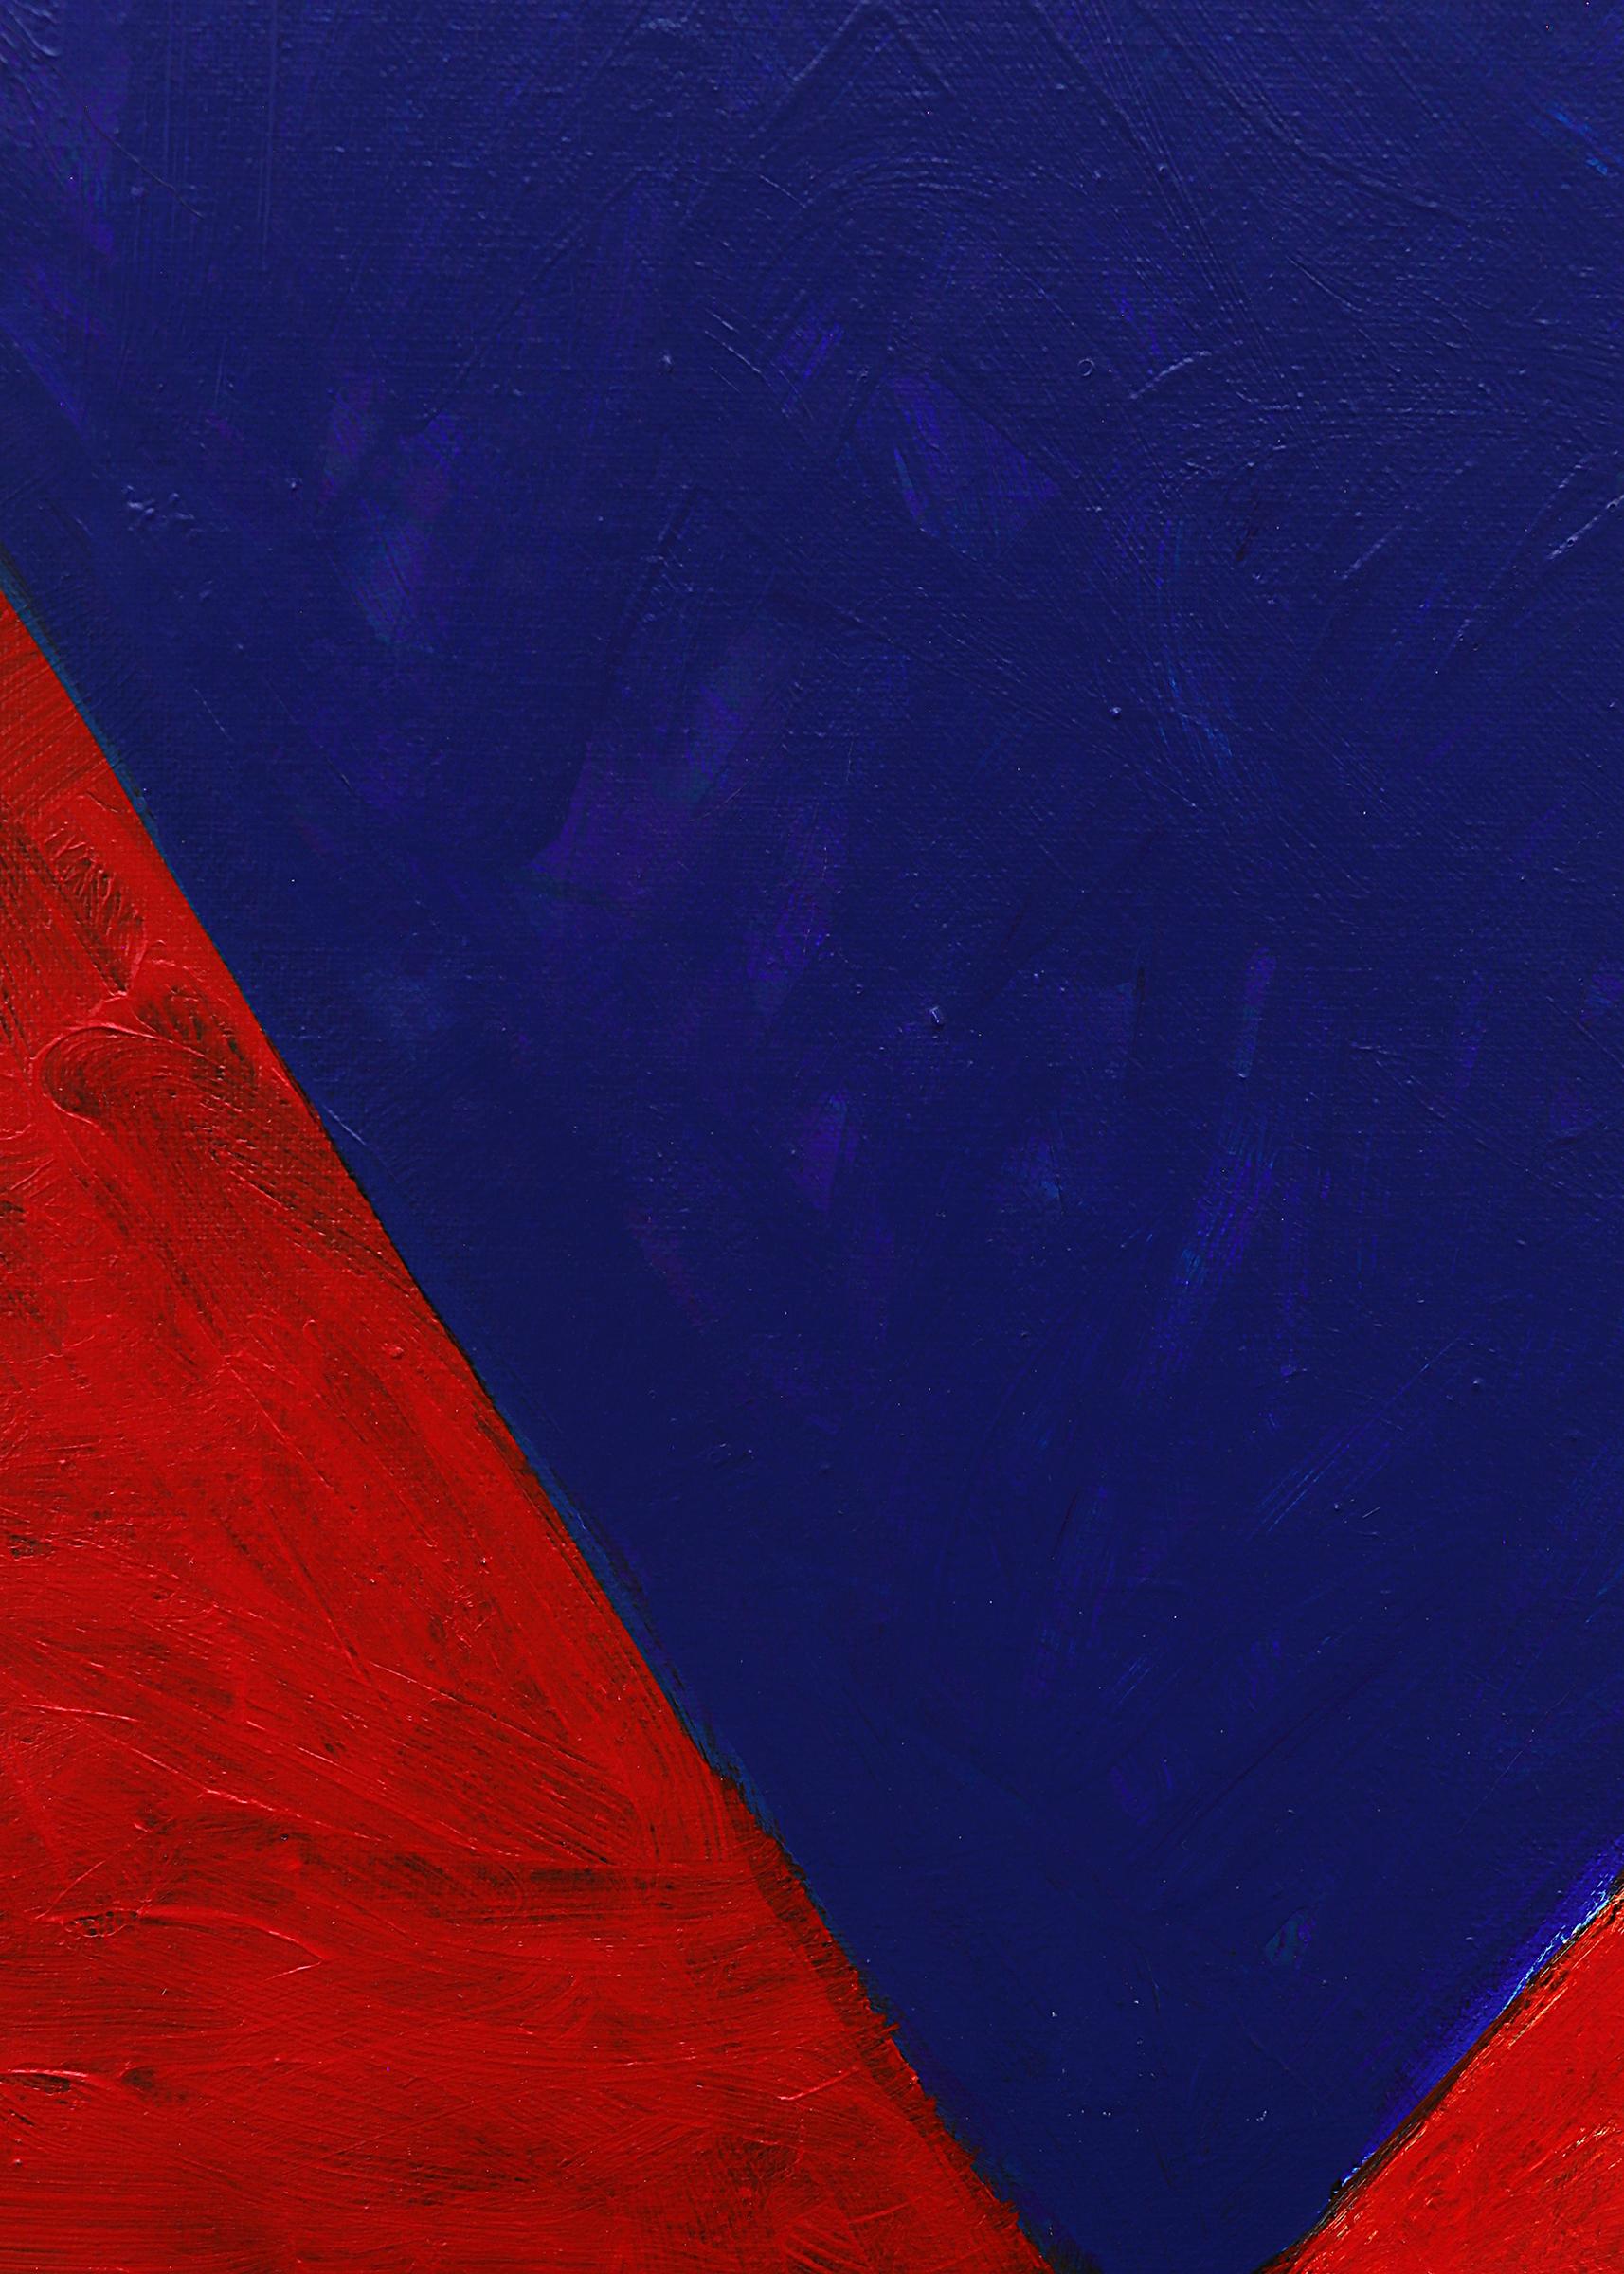 Oil on canvas painting by 20th century Colorado artist Mary Chenoweth. Abstract geometric painting with two blue triangles on a red background. Presented in a custom white frame, outer dimensions measure 33 ½ x 25 ½ x 2 ⅛ inches. Image size is 31 ¾